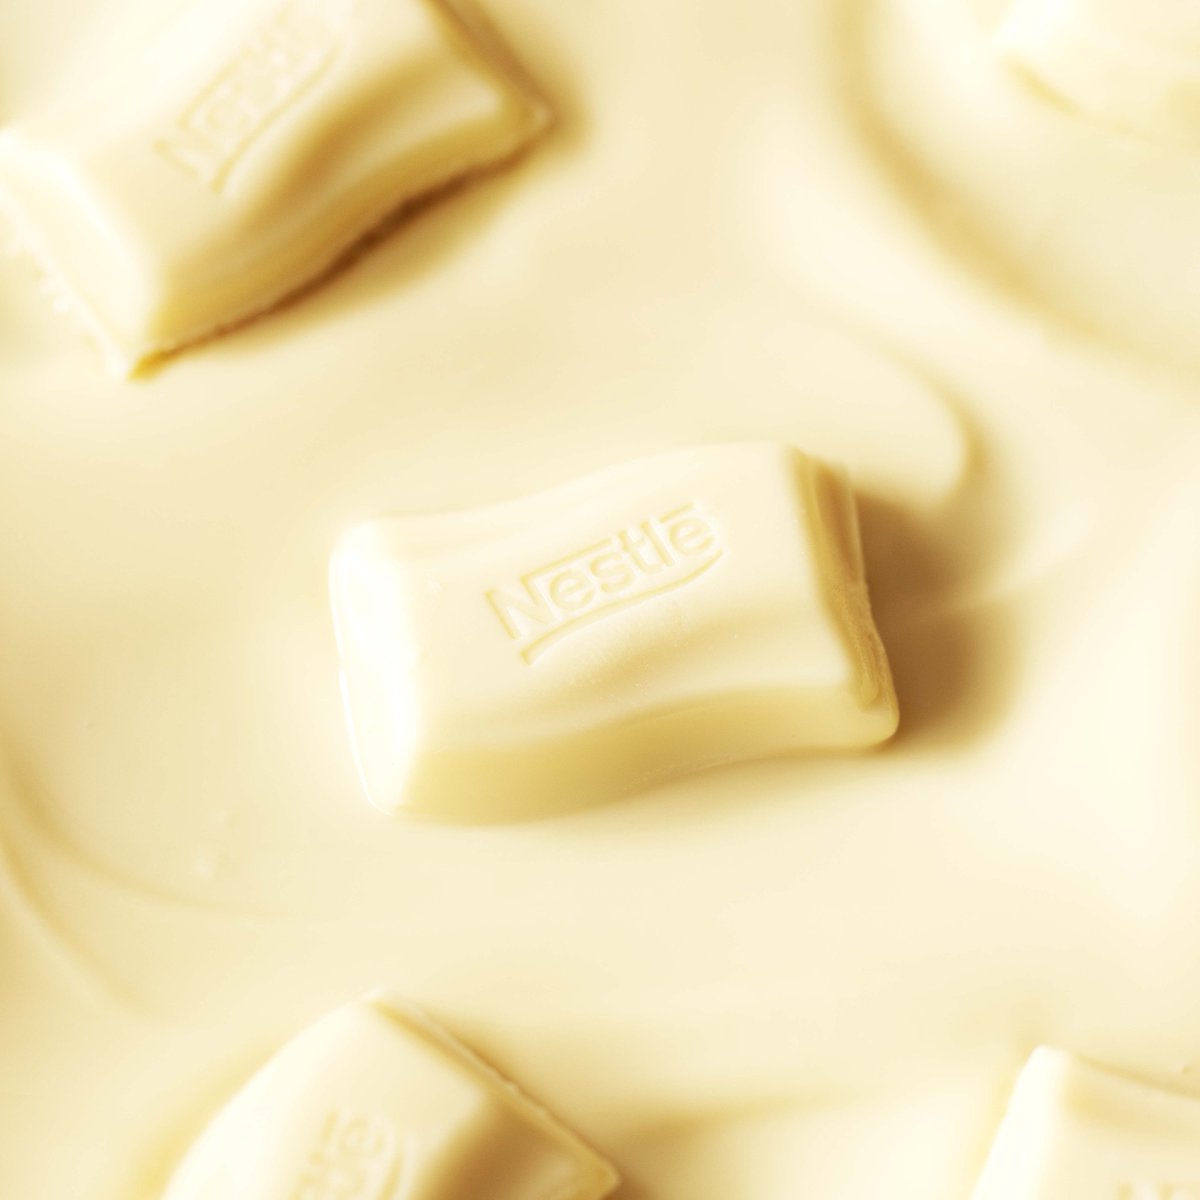 The only thing better than deliciously creamy MILKYBAR is slightly melted MILKYBAR. Do you agree? 💙